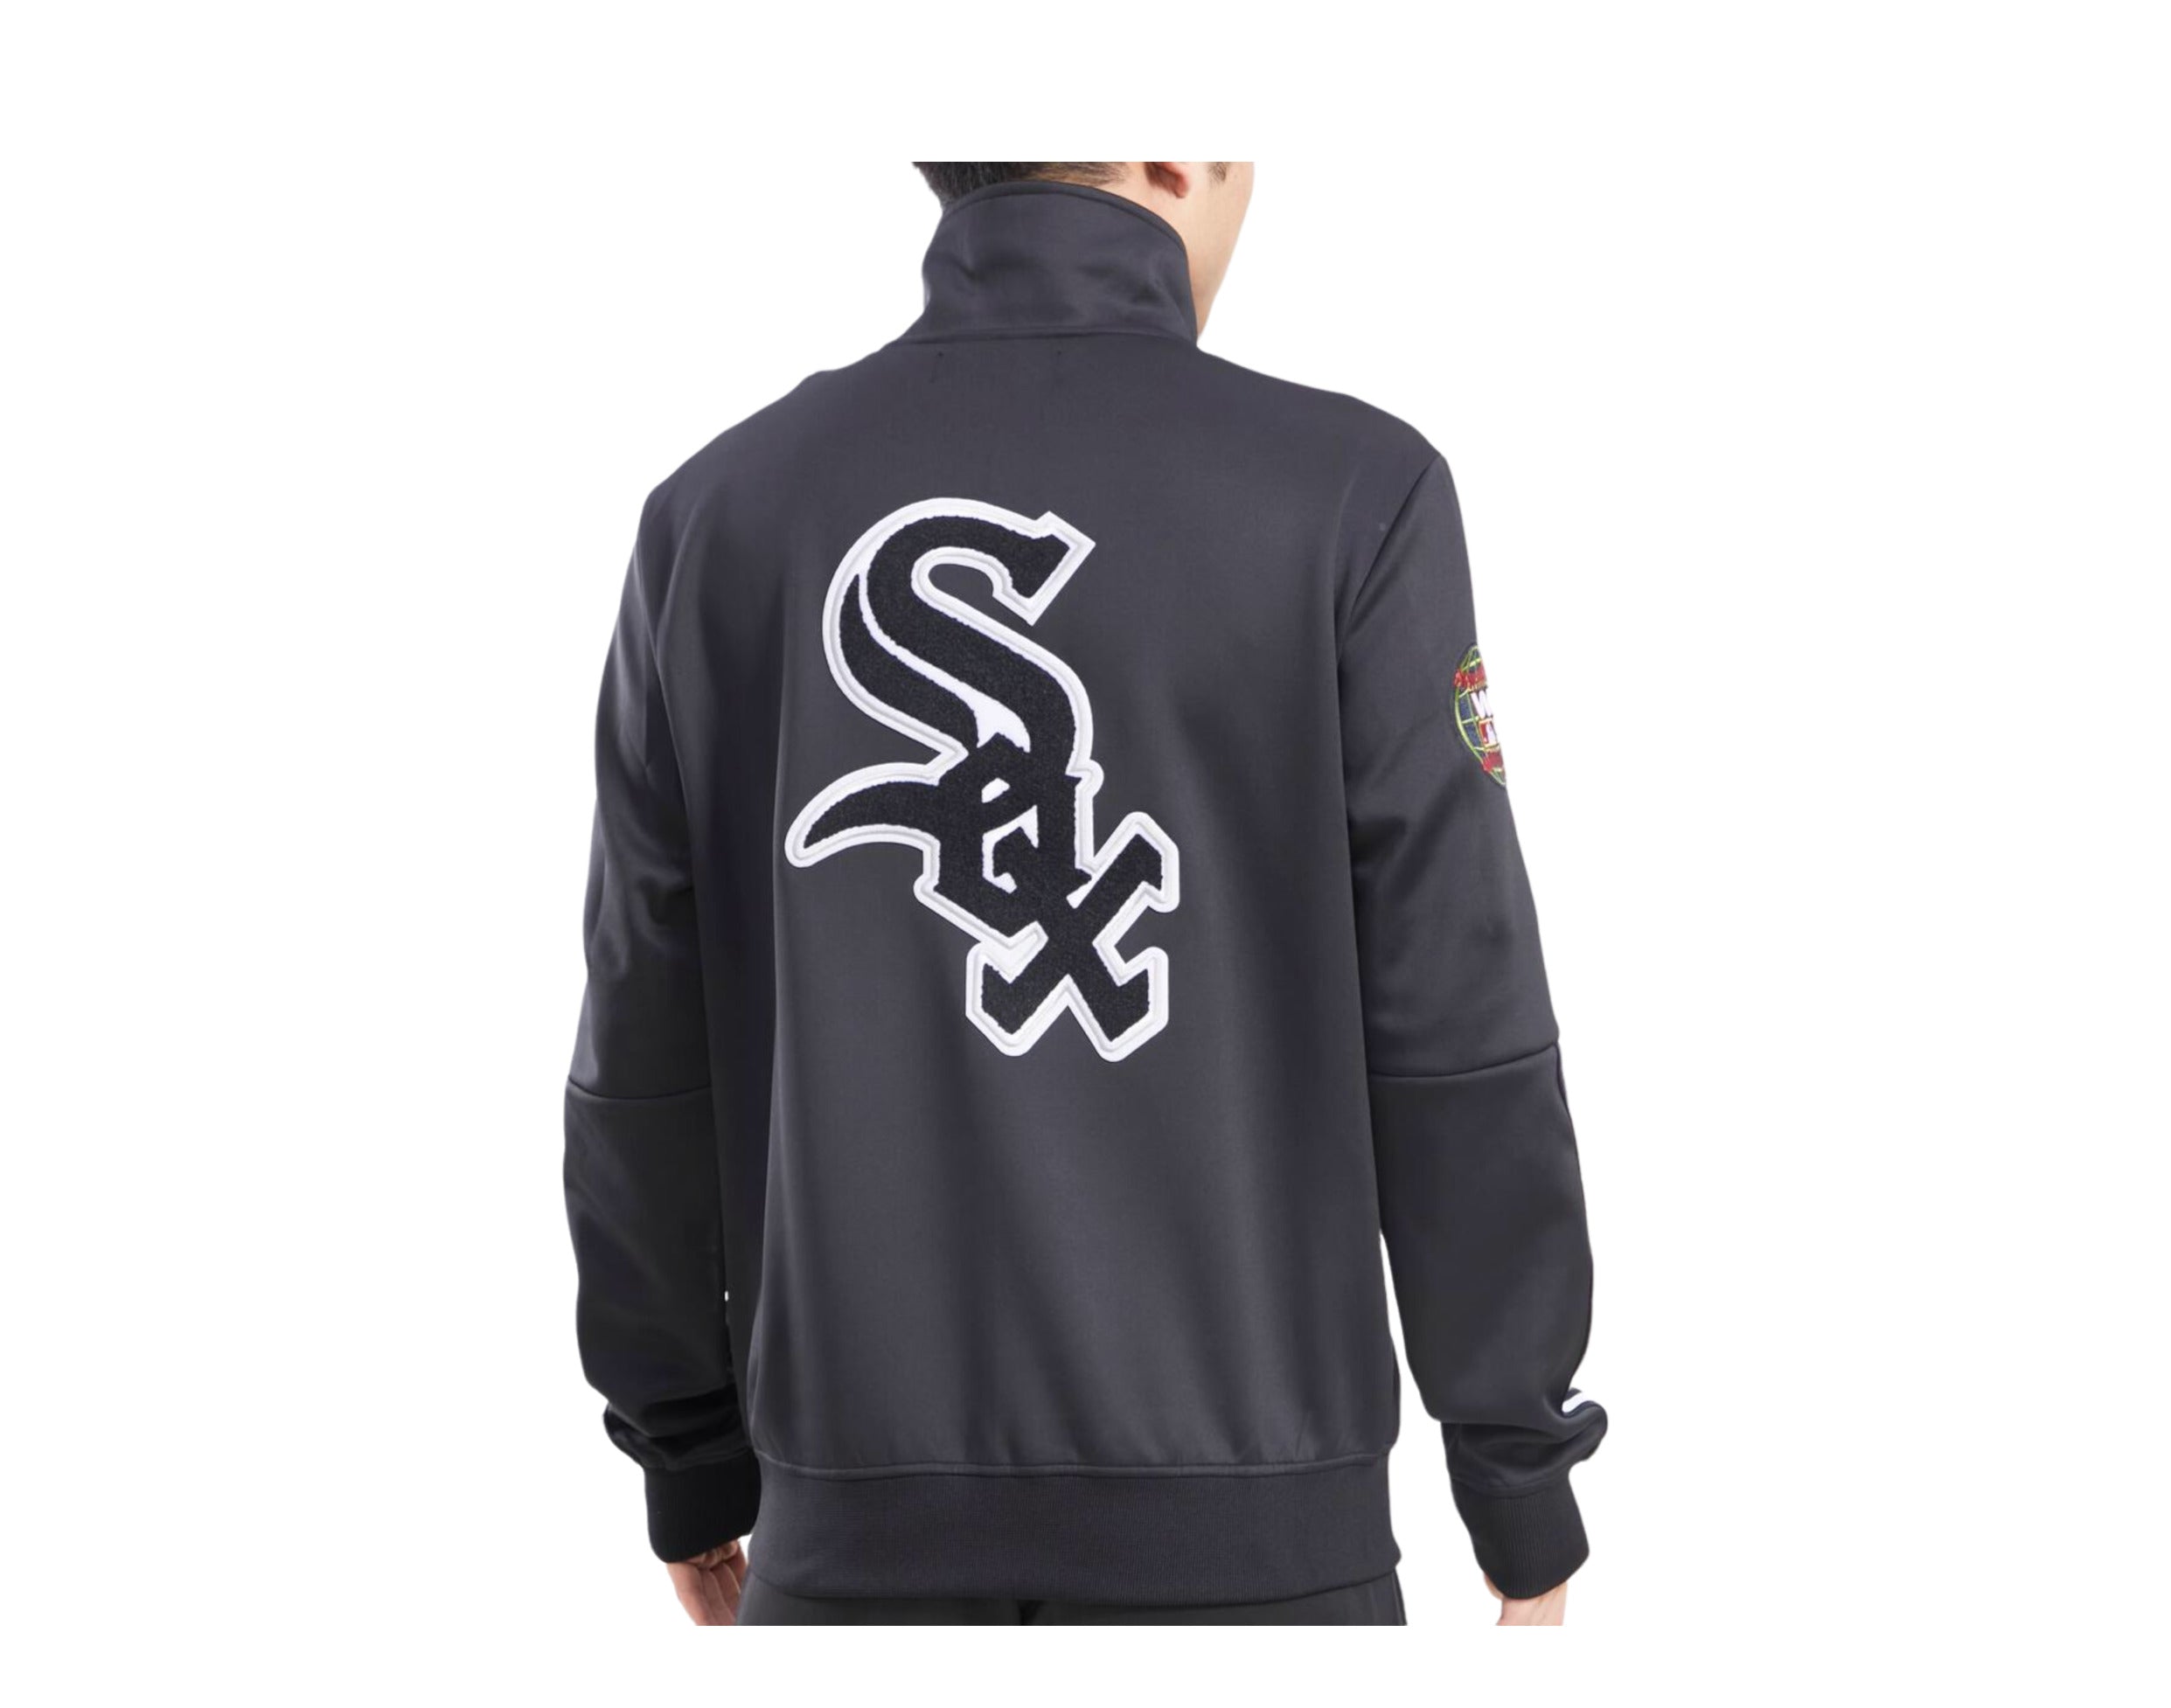 Pro Standard MLB Chicago White Sox Home Town Track Jacket S